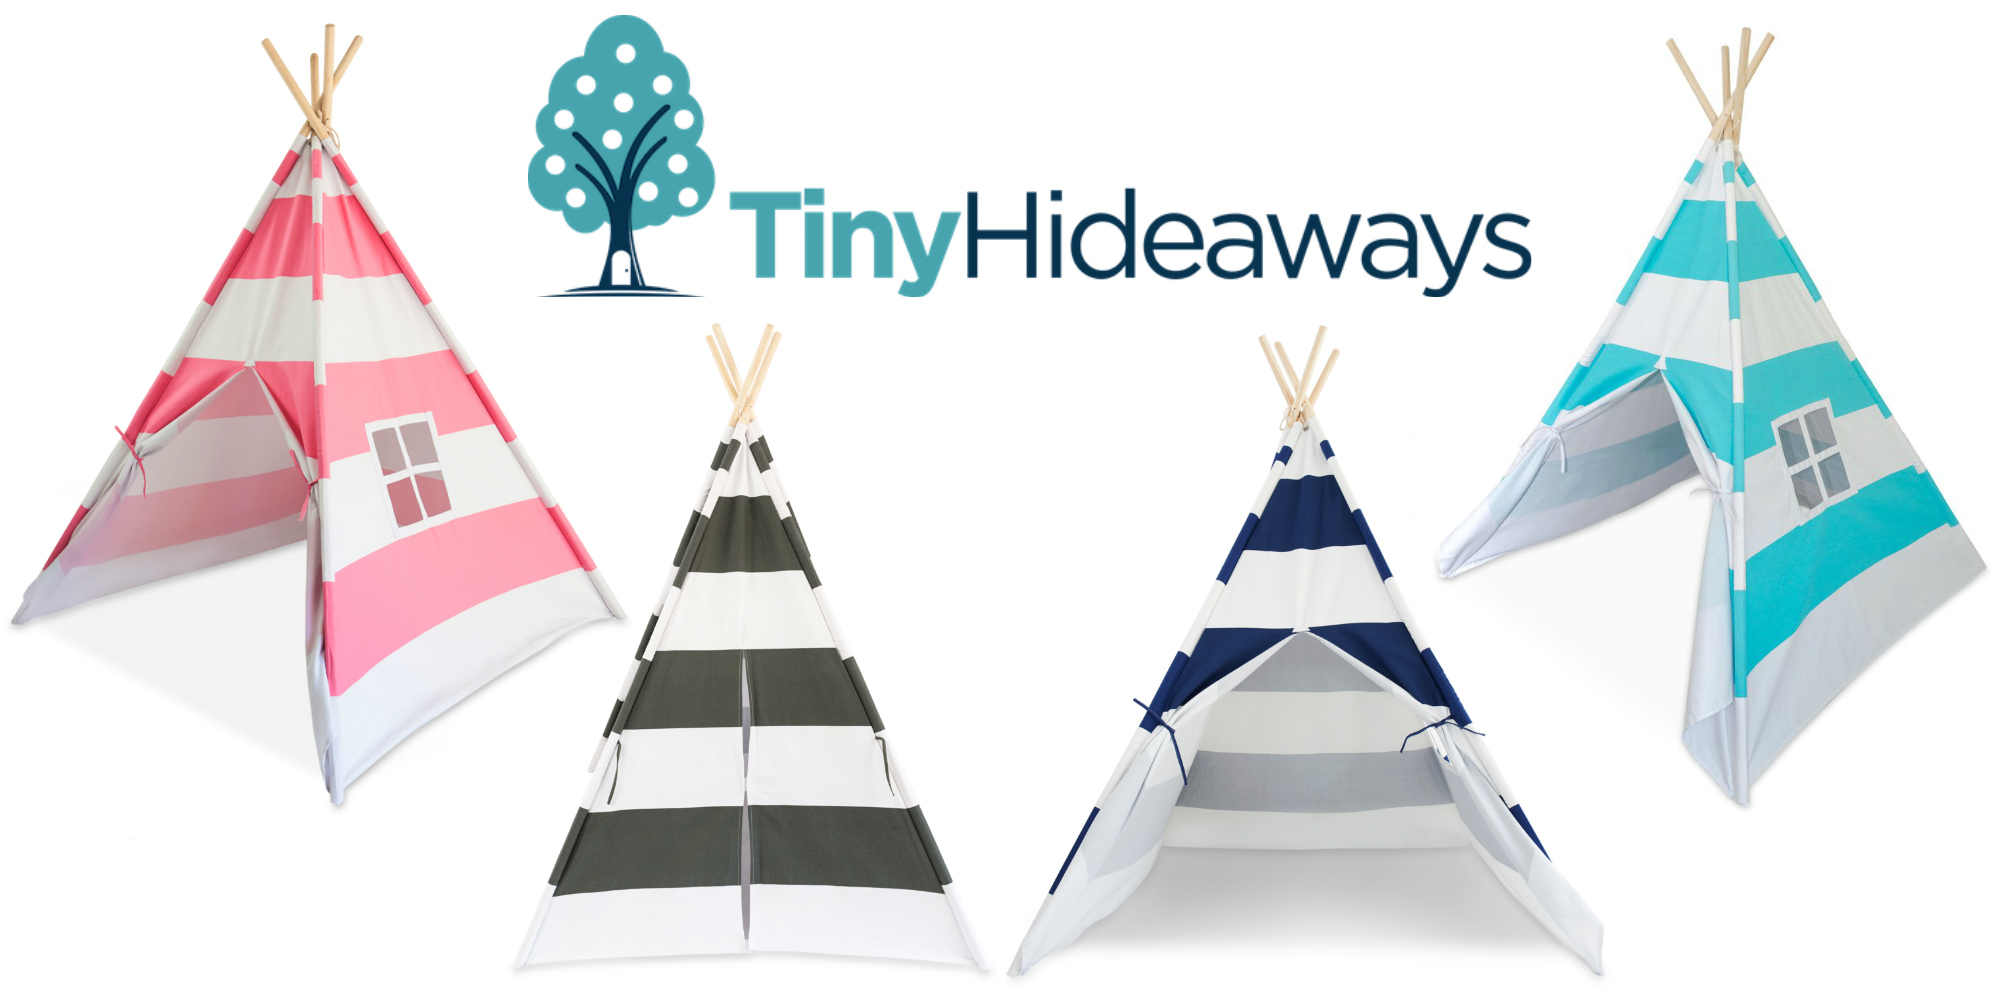 Tiny Hideaways Teepee Tents in US Japan Fam's Unique Gift Guide & Giveaway